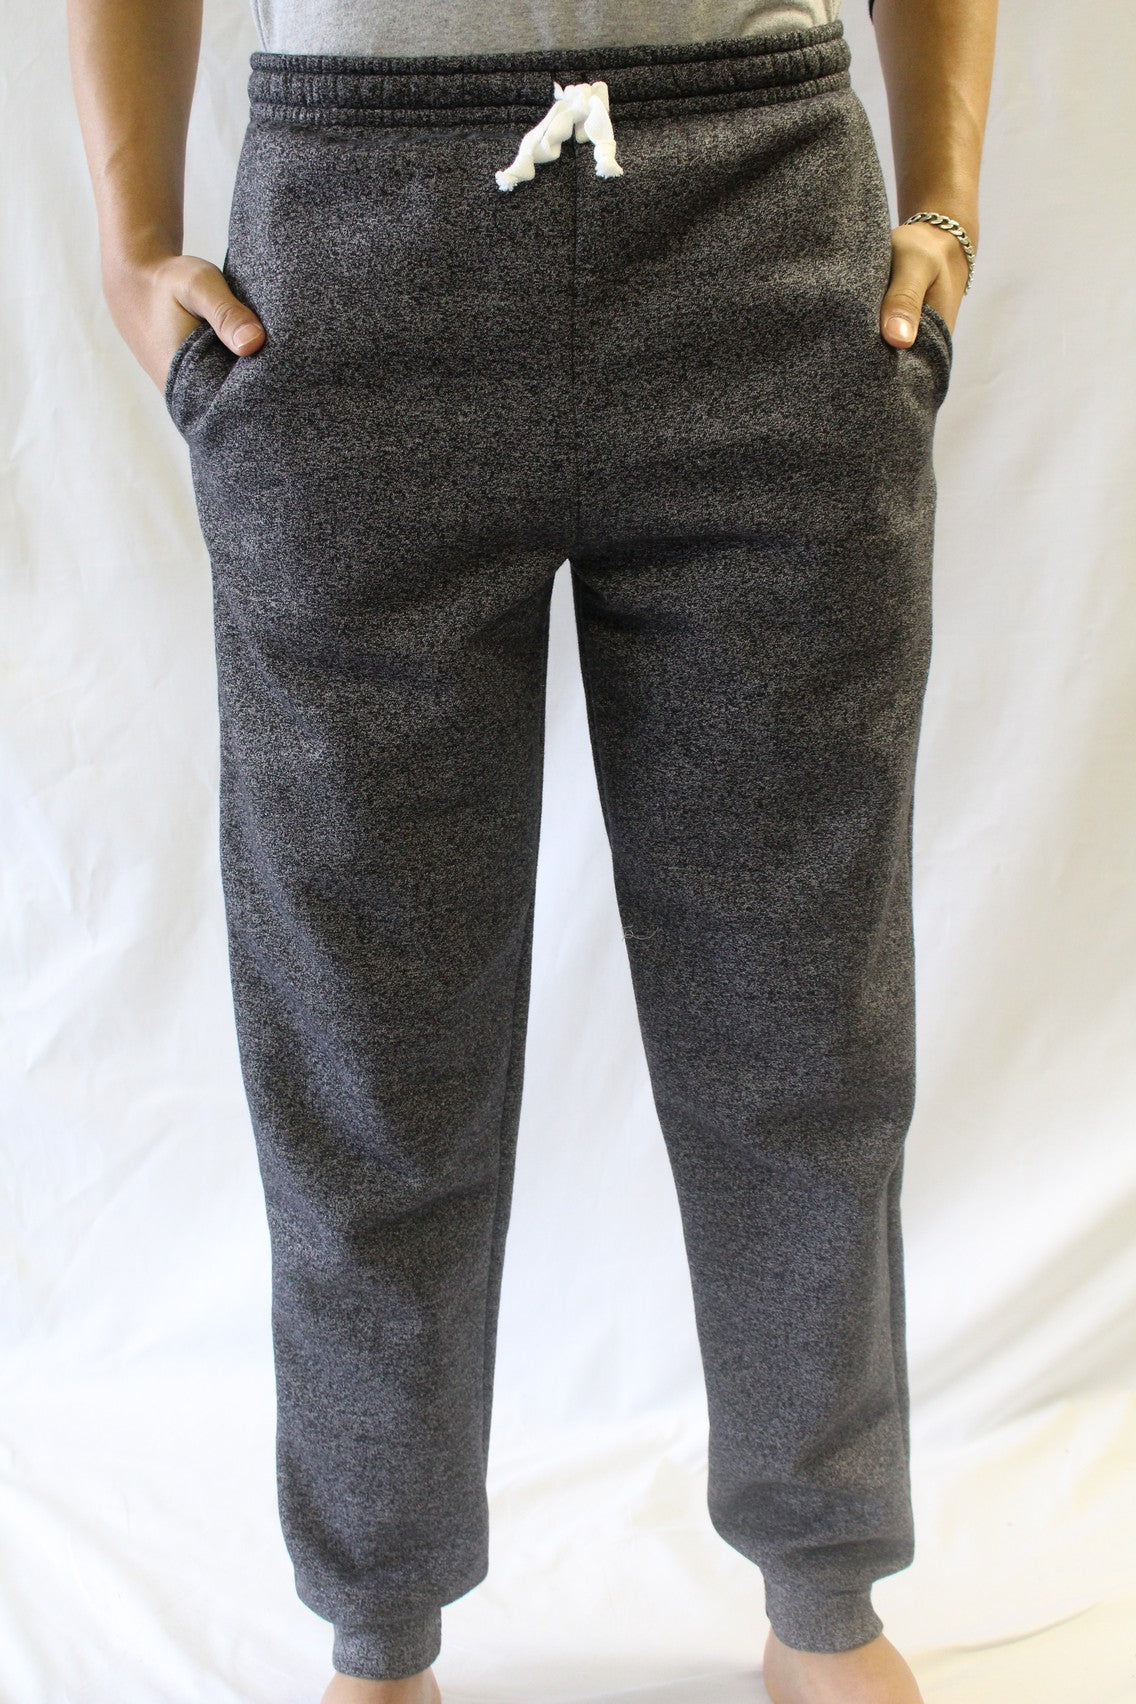 Youth Sweatpant with Cuff - Rebel Apparel Inc.